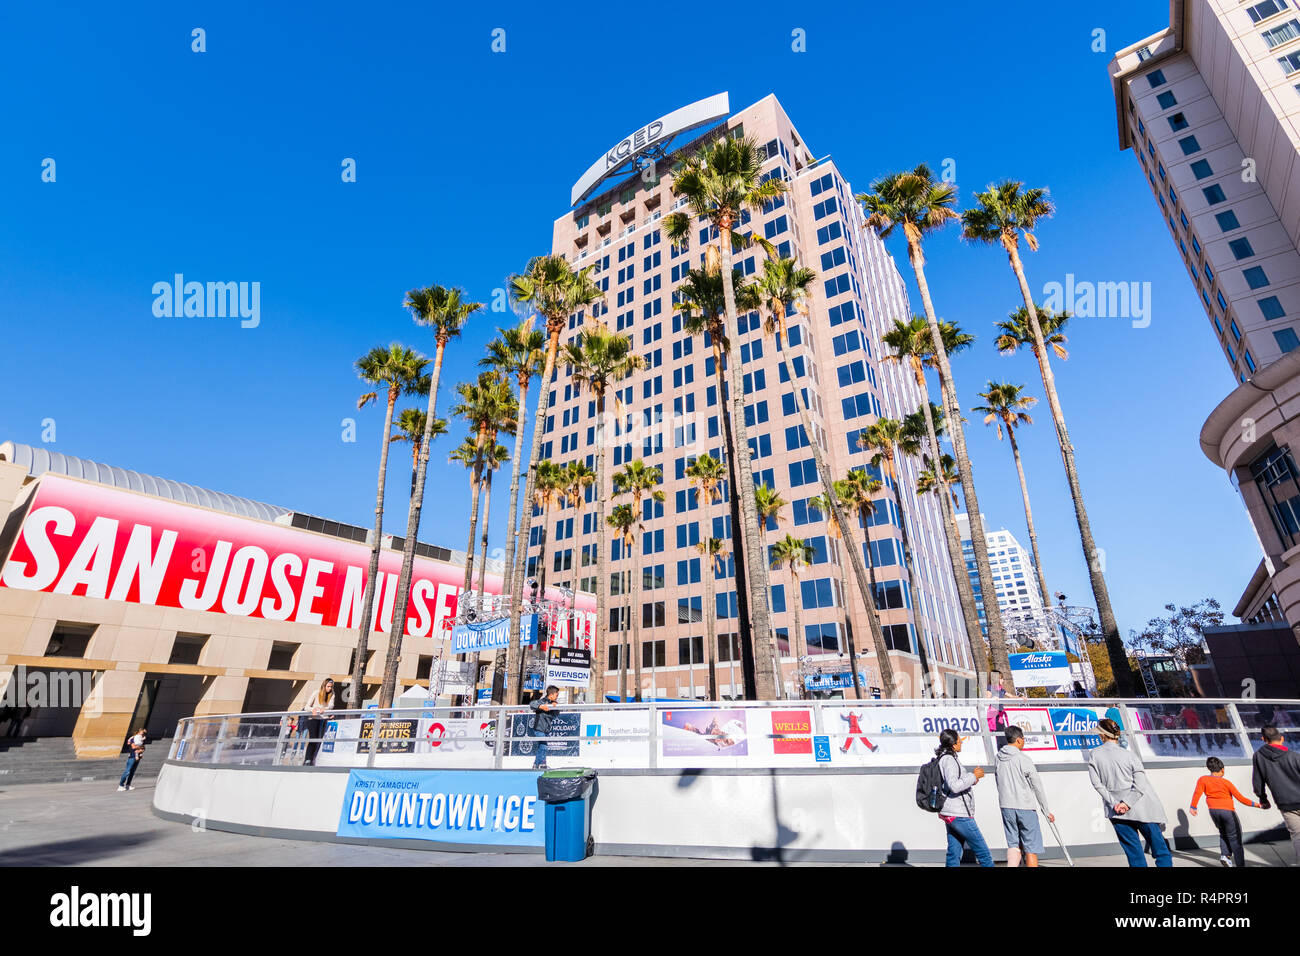 November 25, 2018 San Jose / CA / USA - 'Downtown Ice', a seasonal, family friendly outdoor skating rink situated in Circle of Palms Plaza Stock Photo